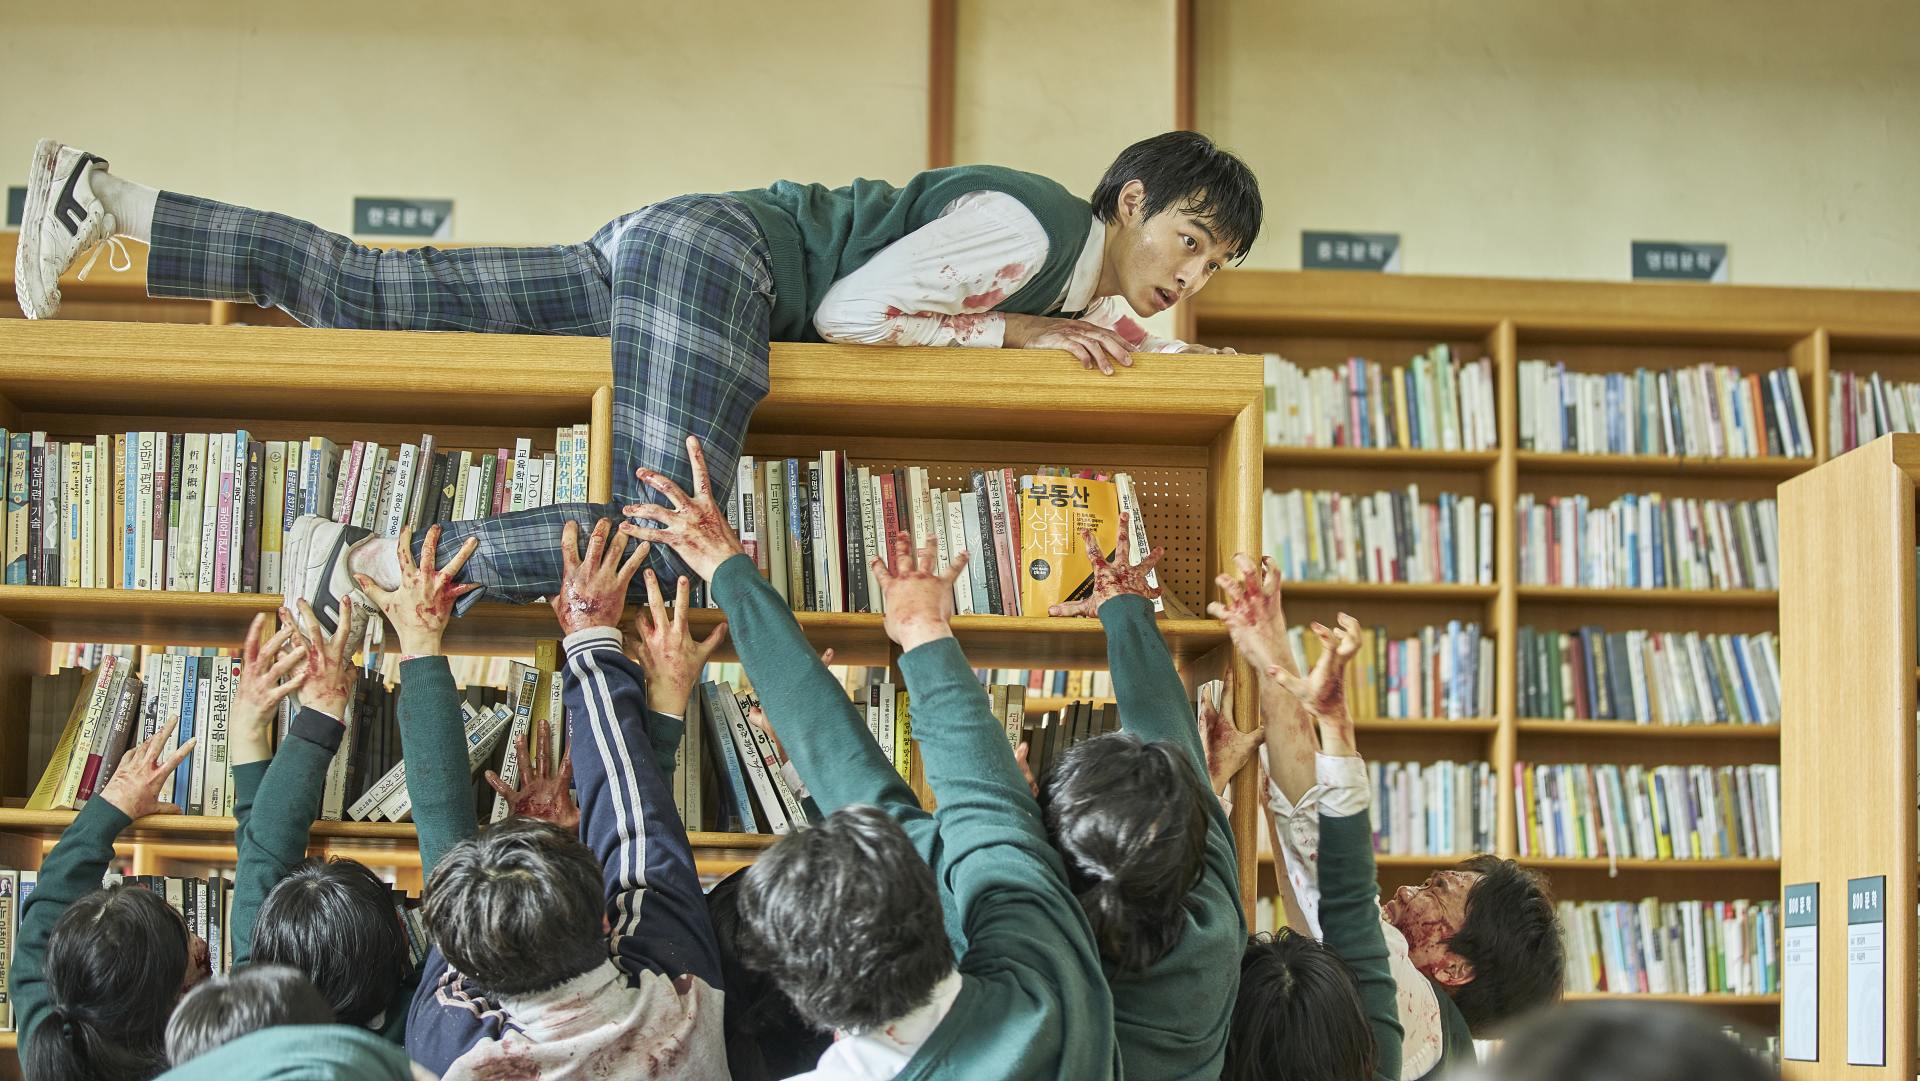 A still from All of Us Are Dead on Netflix showing a school pupil on top of a bookcase as zombies reach for him.